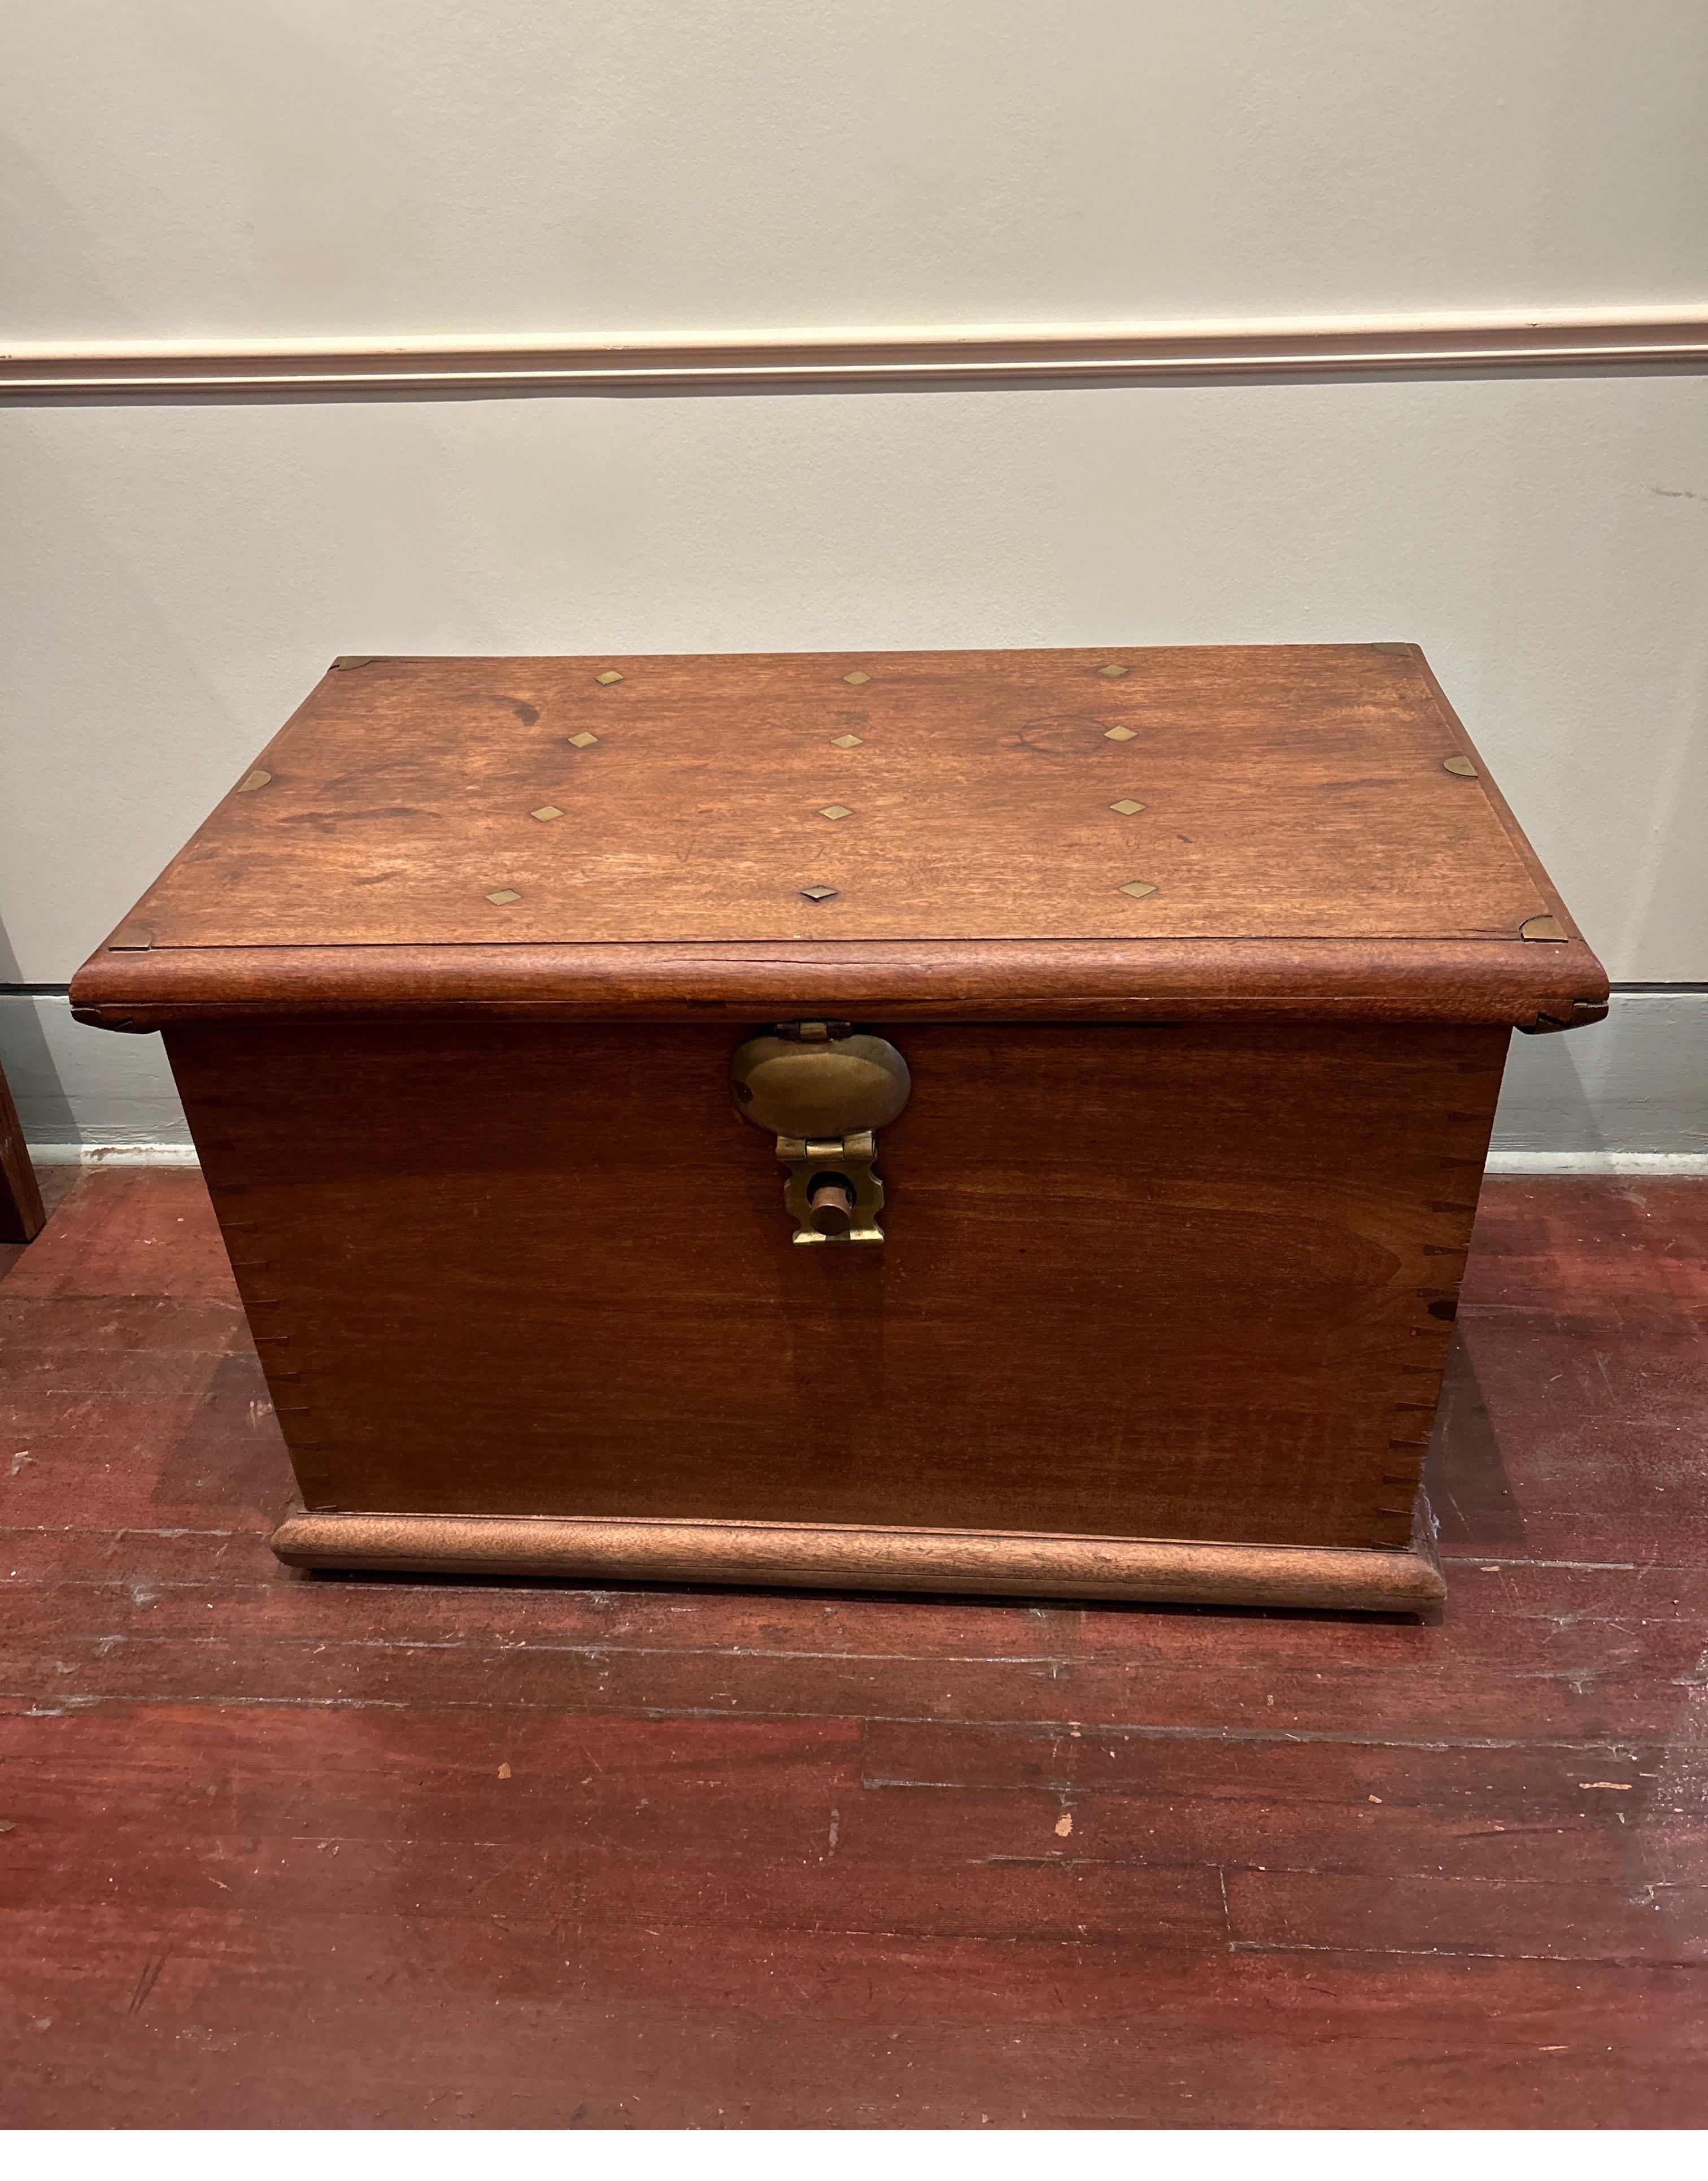 Rare, solid Dutch Colonial teak and brass strongbox. This chest is built like the vault it was meant to be. Heavy, strong wood and weighty hardware including cast iron handles and hinges adorn this uncompromisingly crafted strong box that was likely